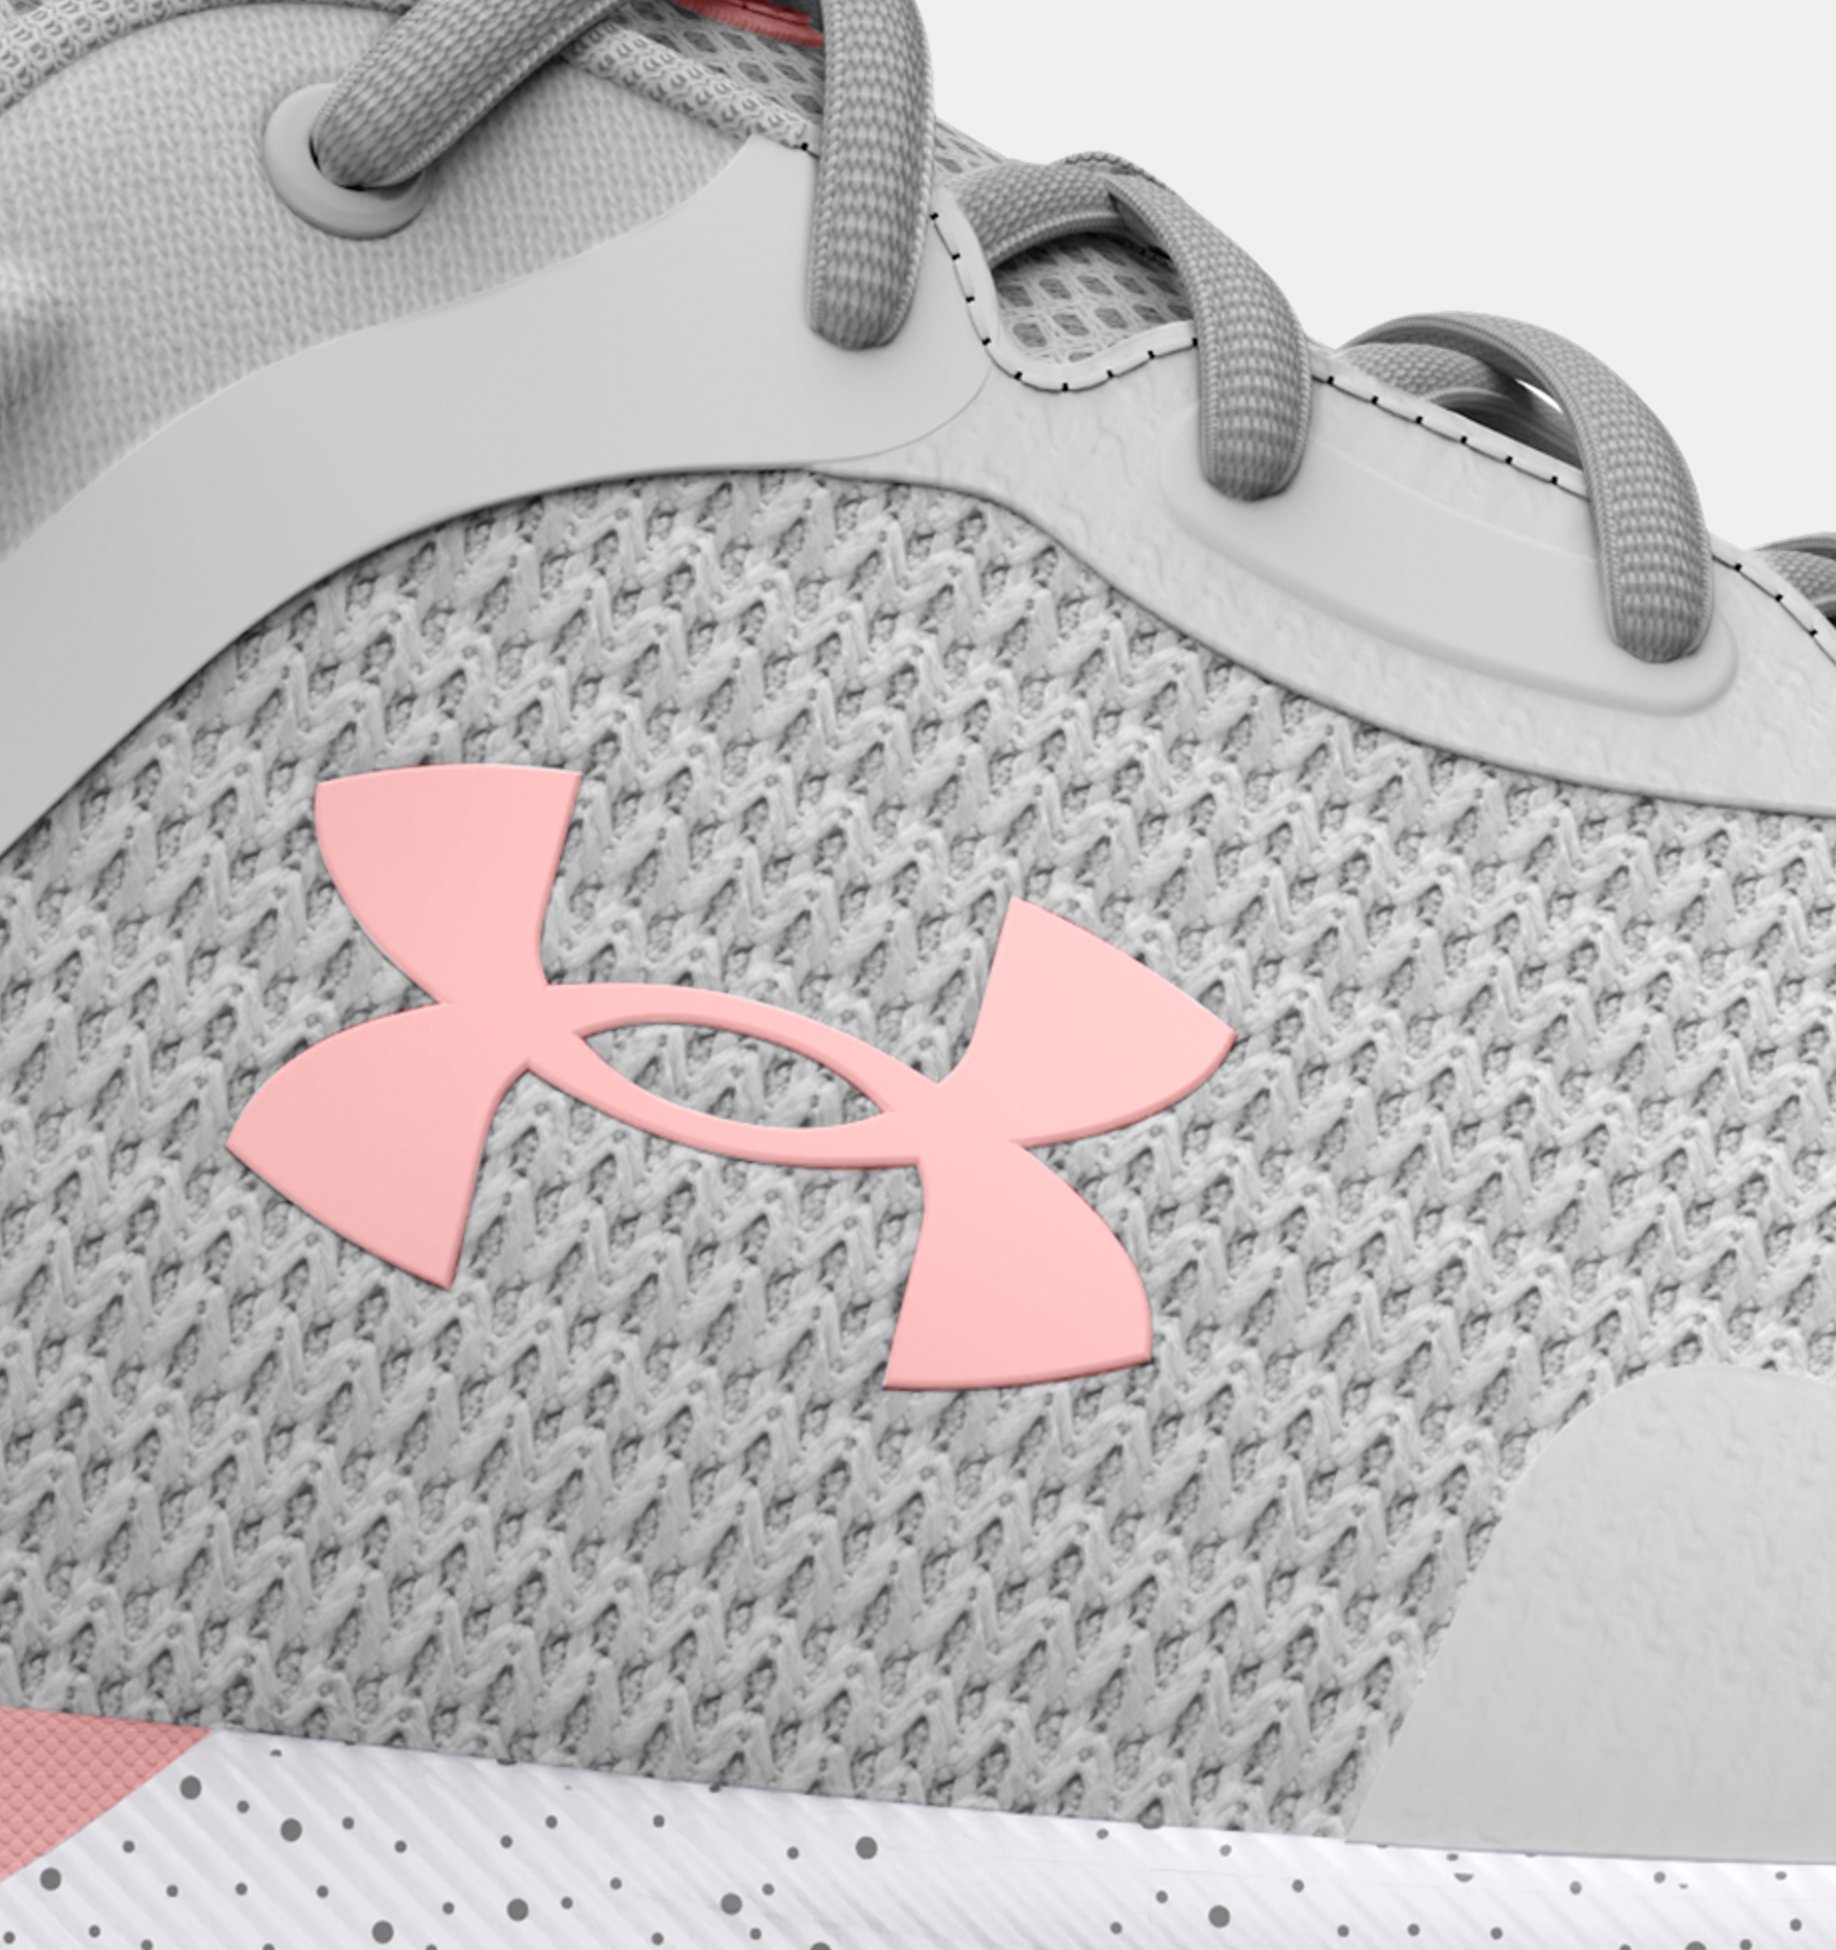 Women's UA Charged Escape 4 Running Shoes | Under Armour